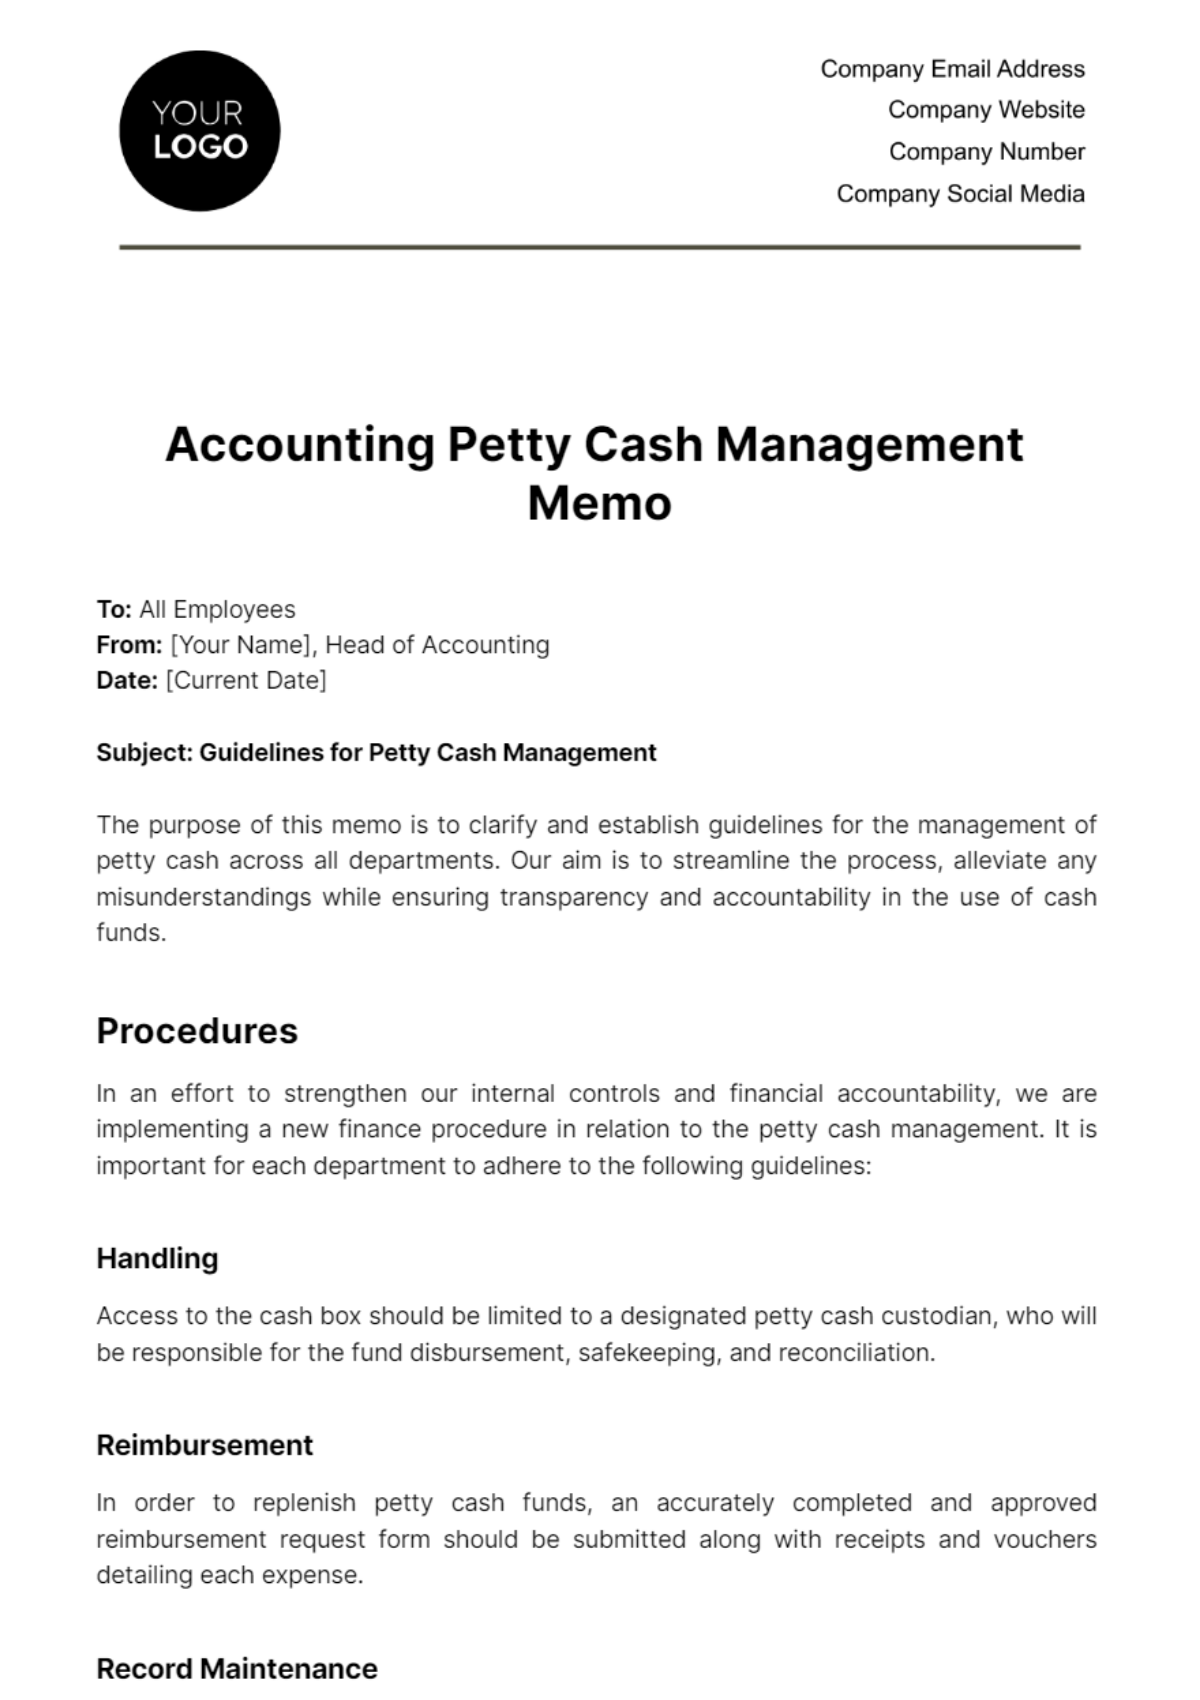 Free Accounting Petty Cash Management Memo Template